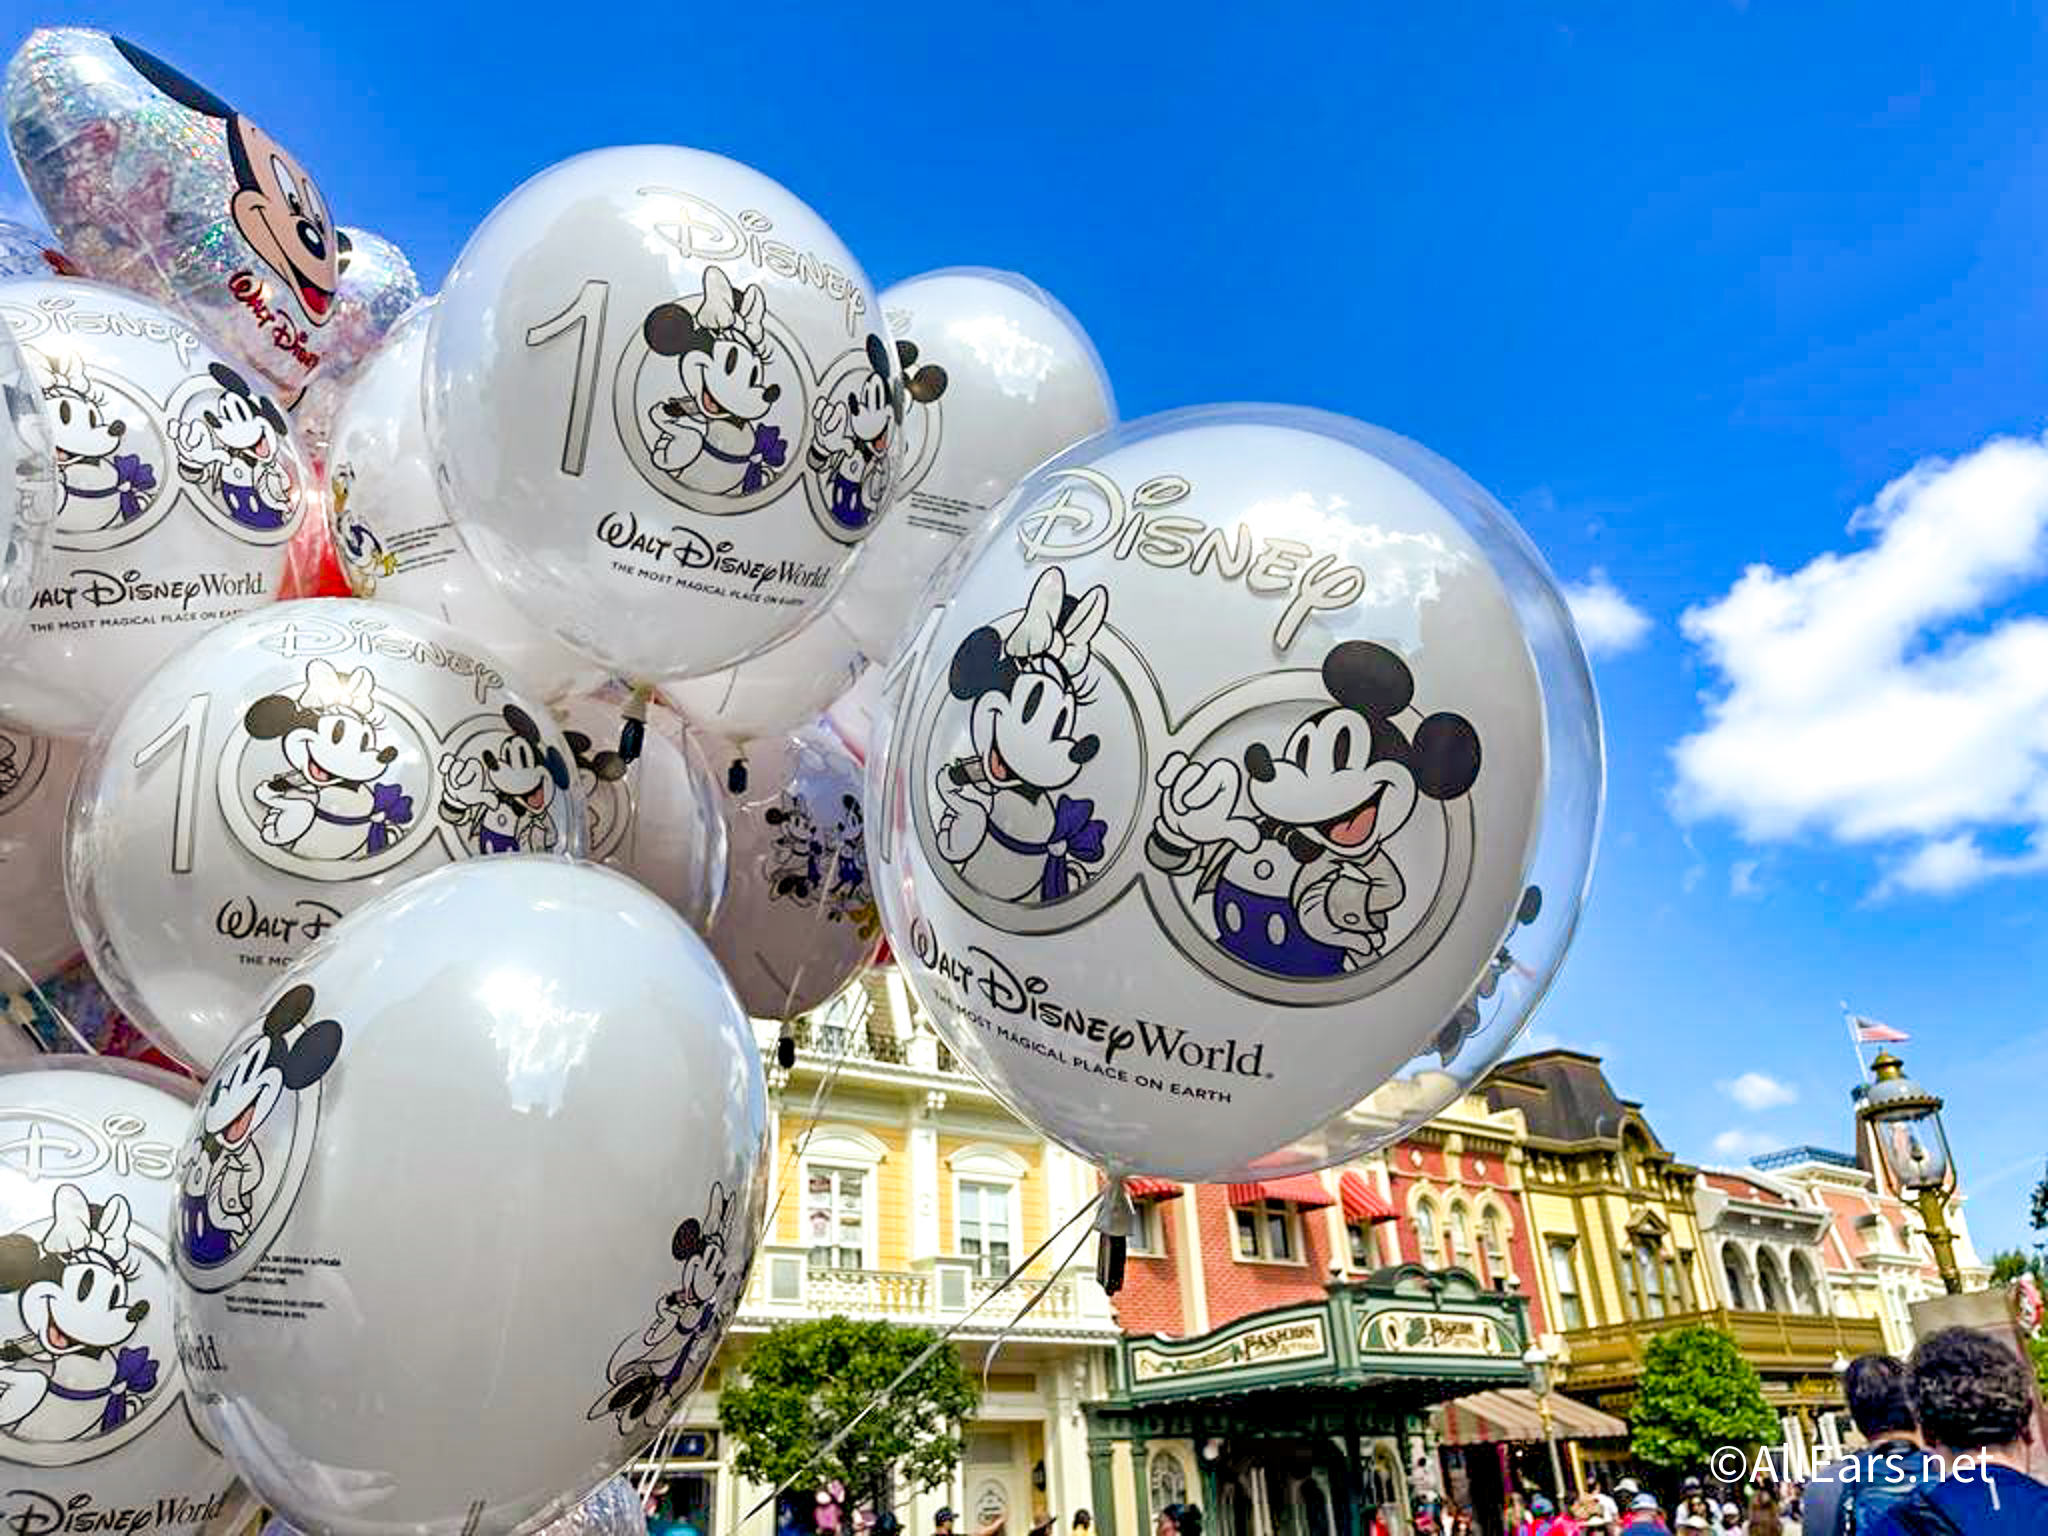 Where to Find the NEW 100th Anniversary Balloons at Disney World